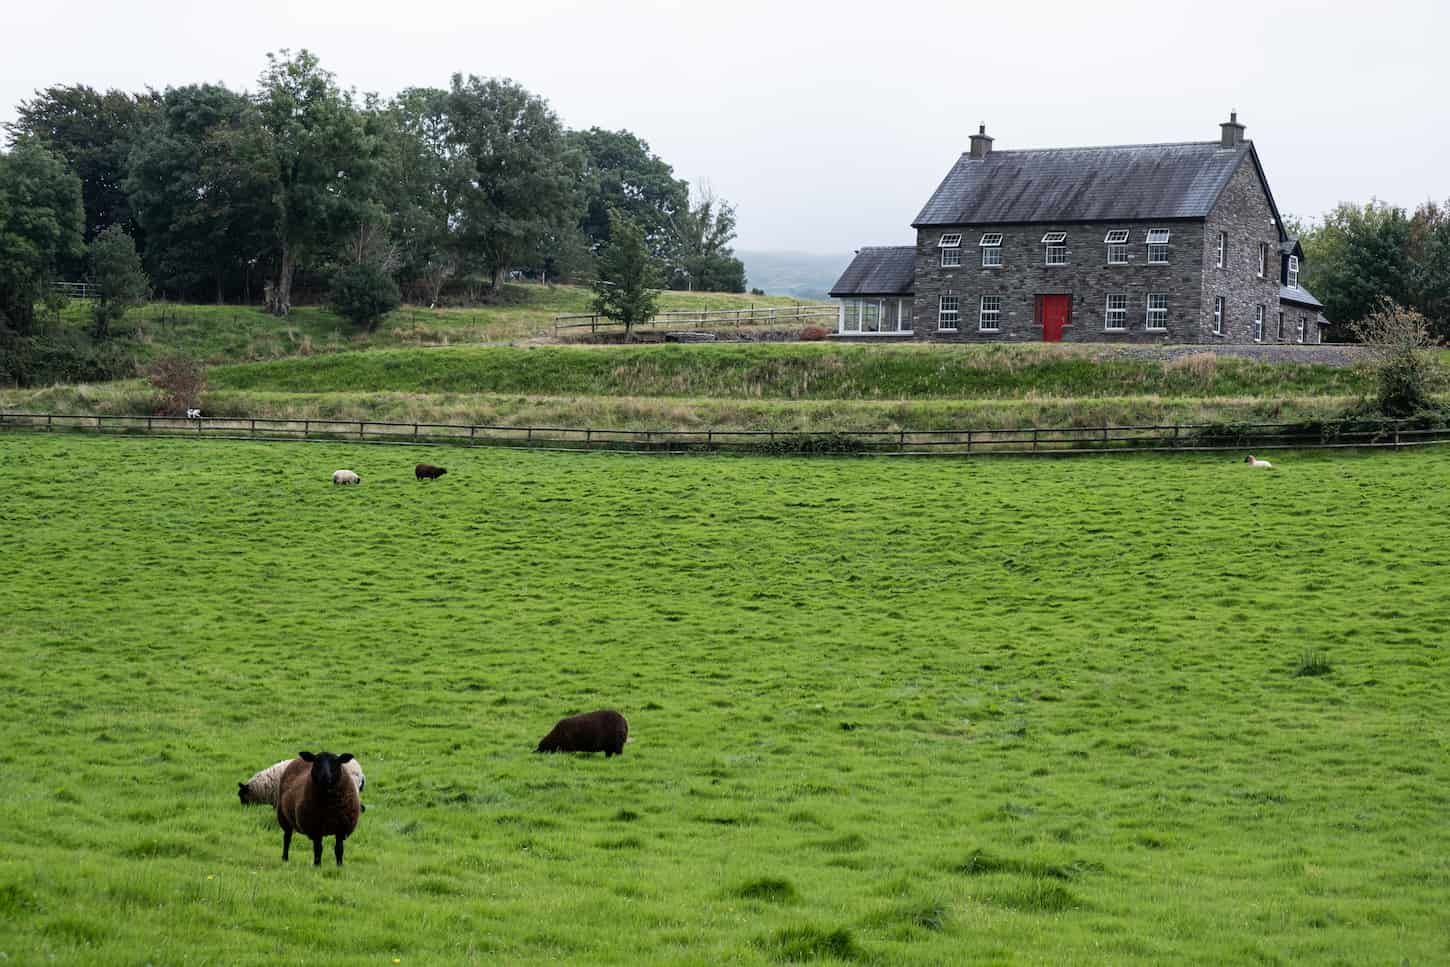 An image of a Typical Irish farmhouse with green grass and domestic coat animals feeding in Ireland countryside Europe.